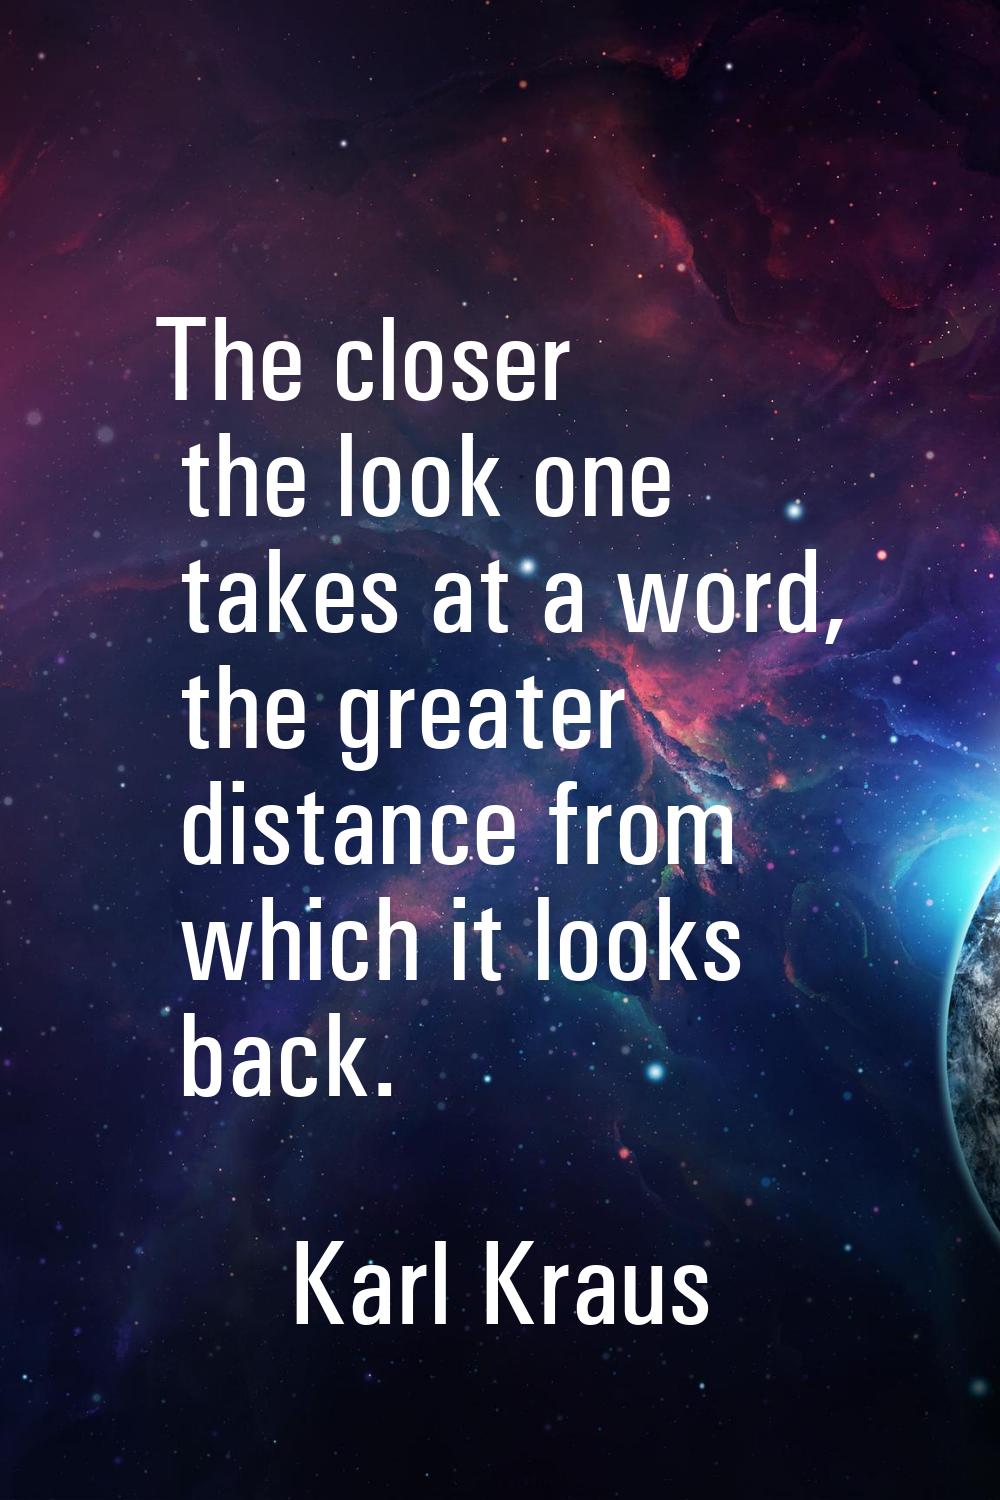 The closer the look one takes at a word, the greater distance from which it looks back.